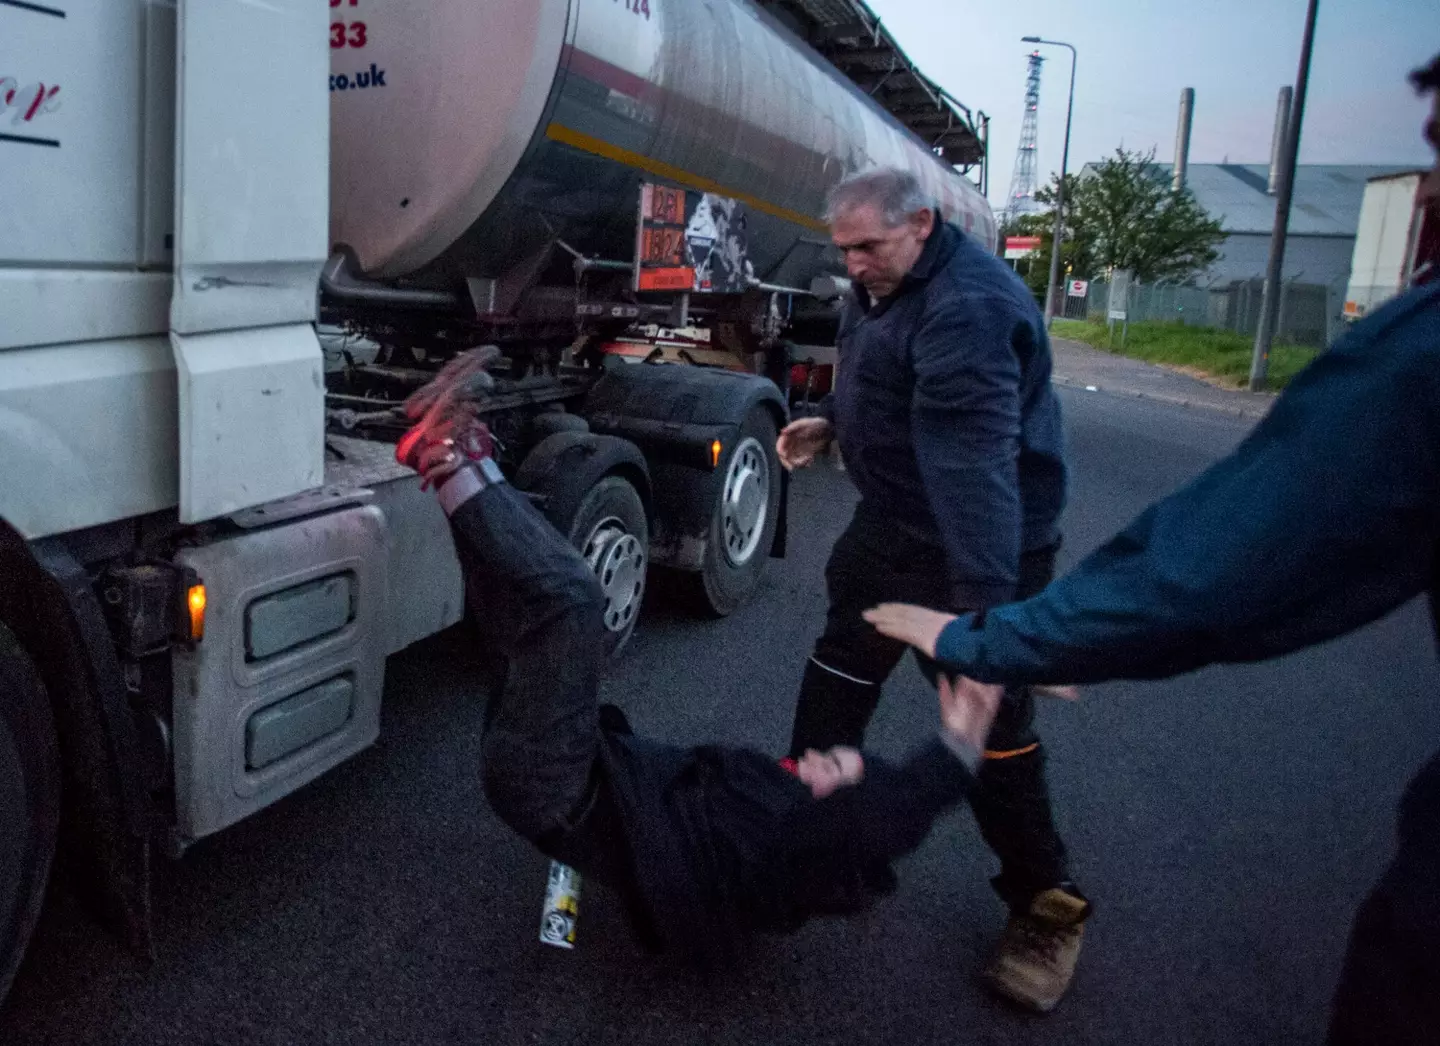 A truck driver was photographed angrily pulling down one of the protestors from his tanker.